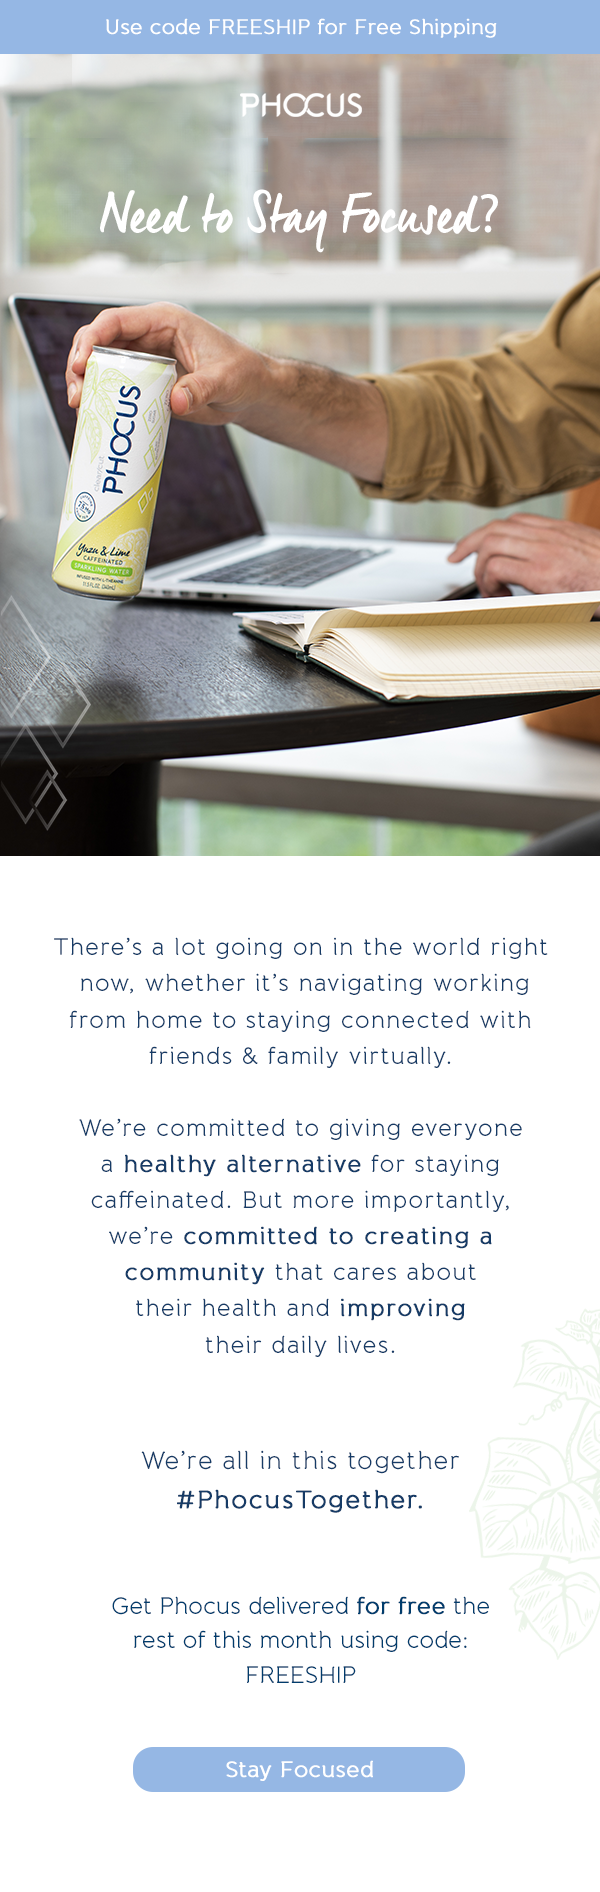 There's a lot going on in the world right  now, whether it's navigating working  from home to staying connected with  friends & family virtually.   We're committed to giving everyone  a healthy alternative for staying  caffeinated. But more importantly,  we're committed to creating a  community that cares about  their health and improving  their daily lives. We're all in this together #PhocusTogether. Get Phocus delivered for free the  rest of this month using code:  FREESHIP